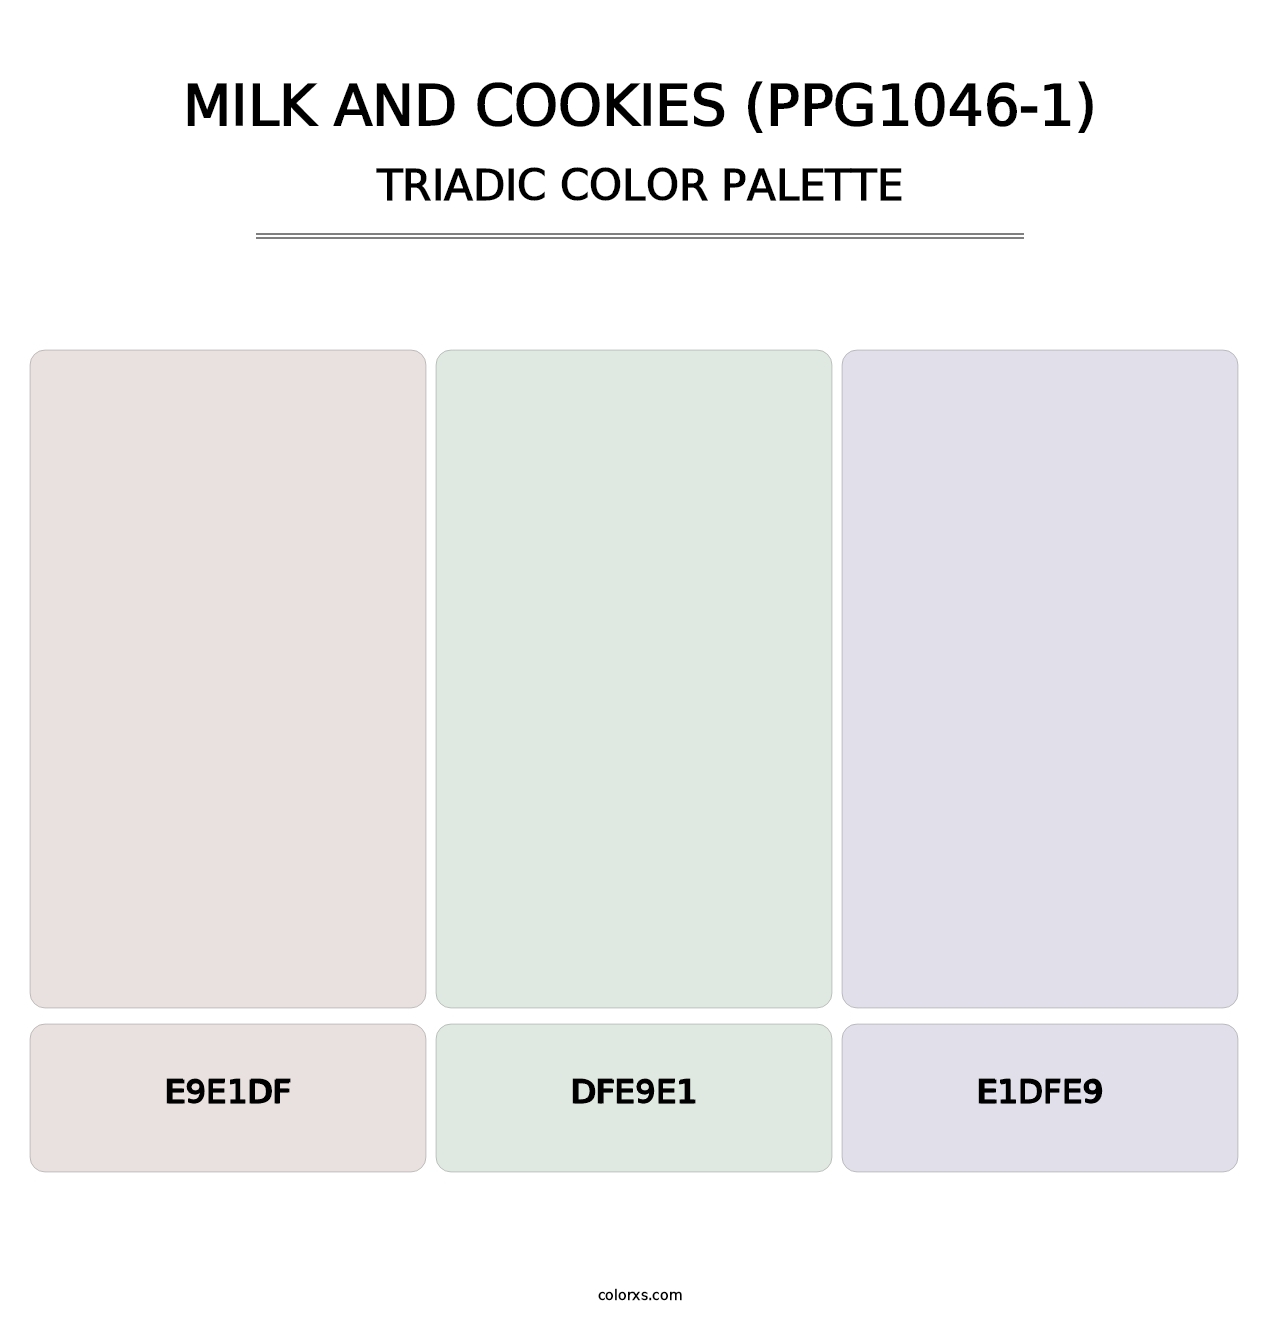 Milk And Cookies (PPG1046-1) - Triadic Color Palette